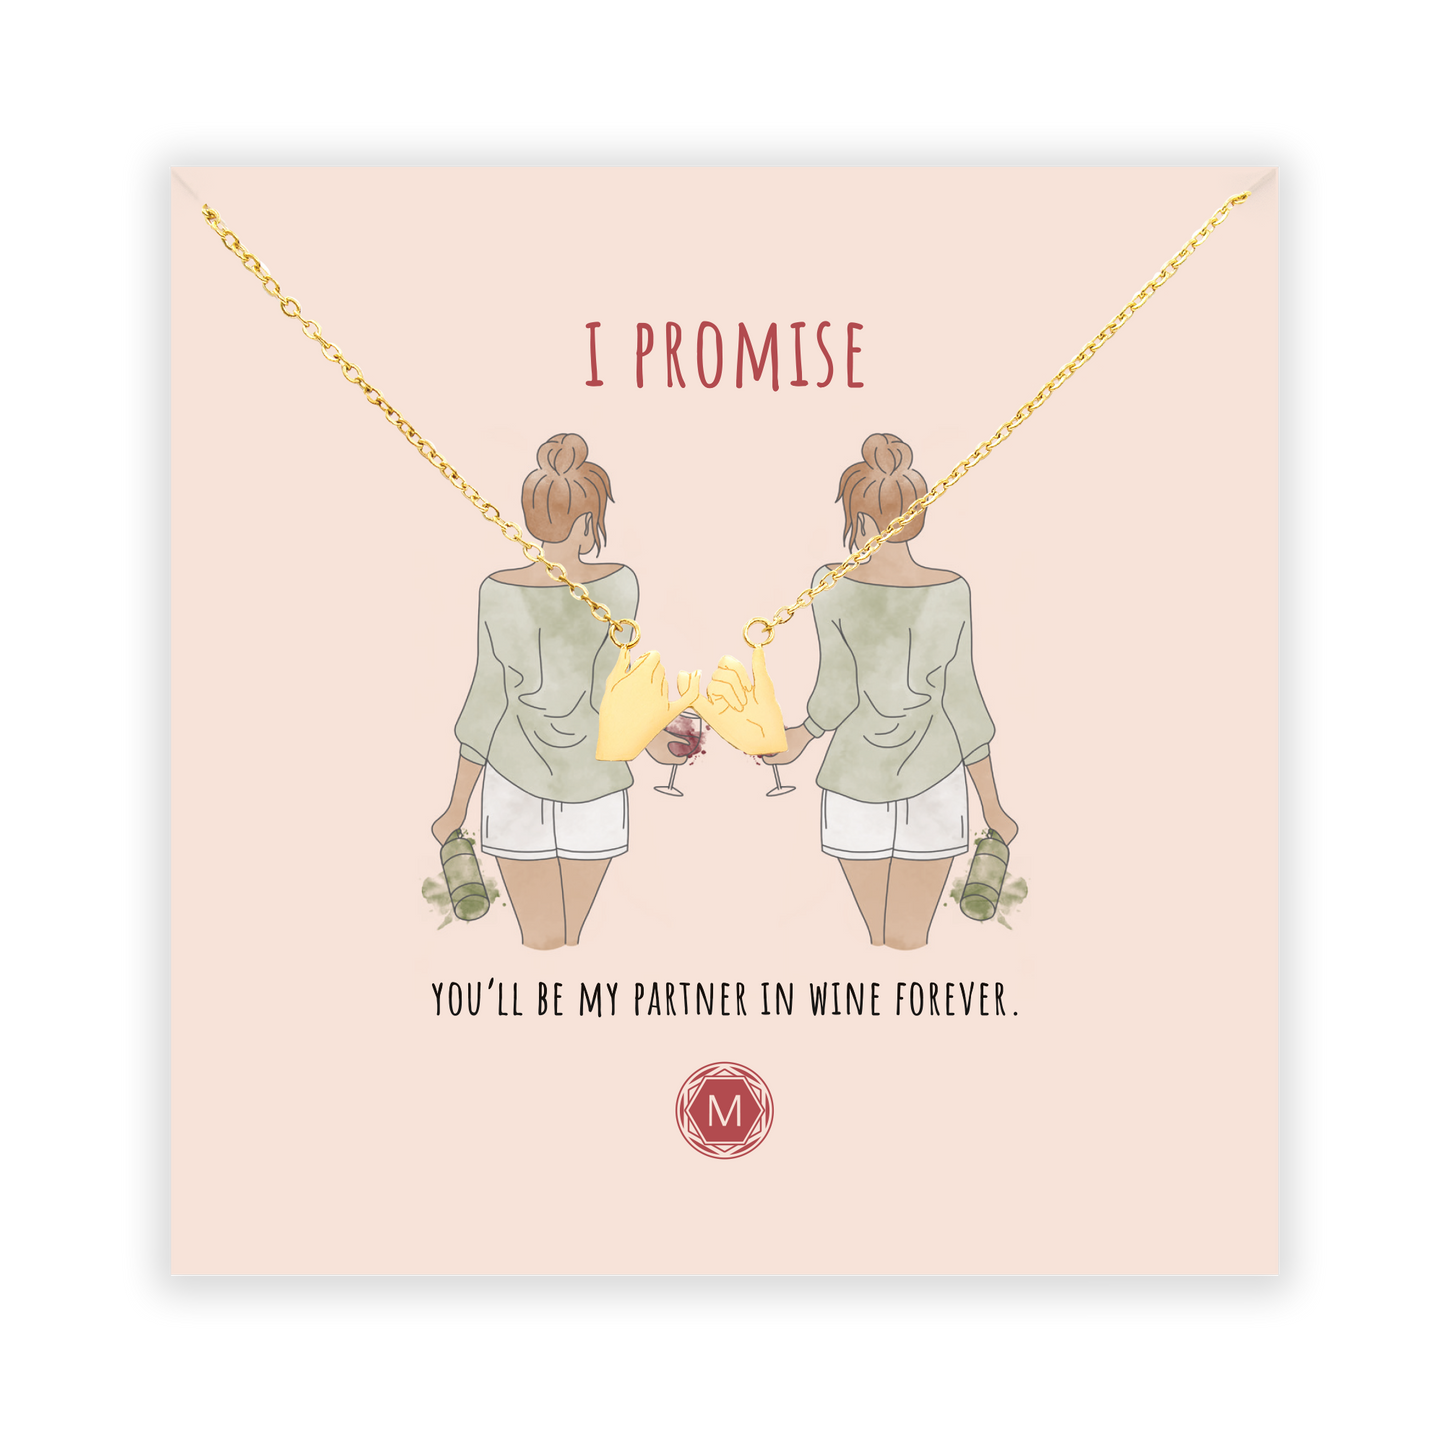 I PROMISE Necklace